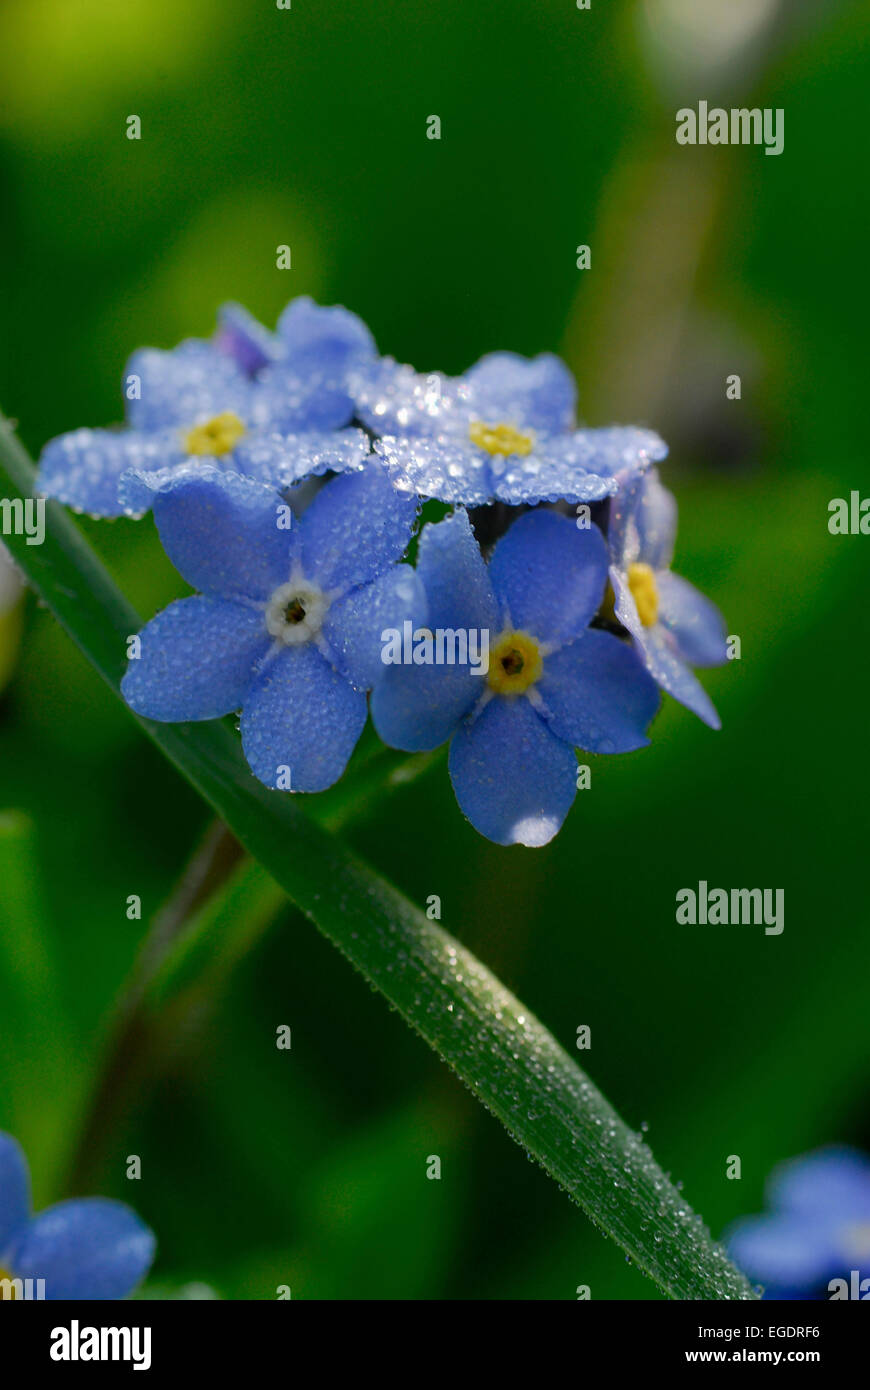 Pearls of dew covering a forget-me-not, Germany Stock Photo